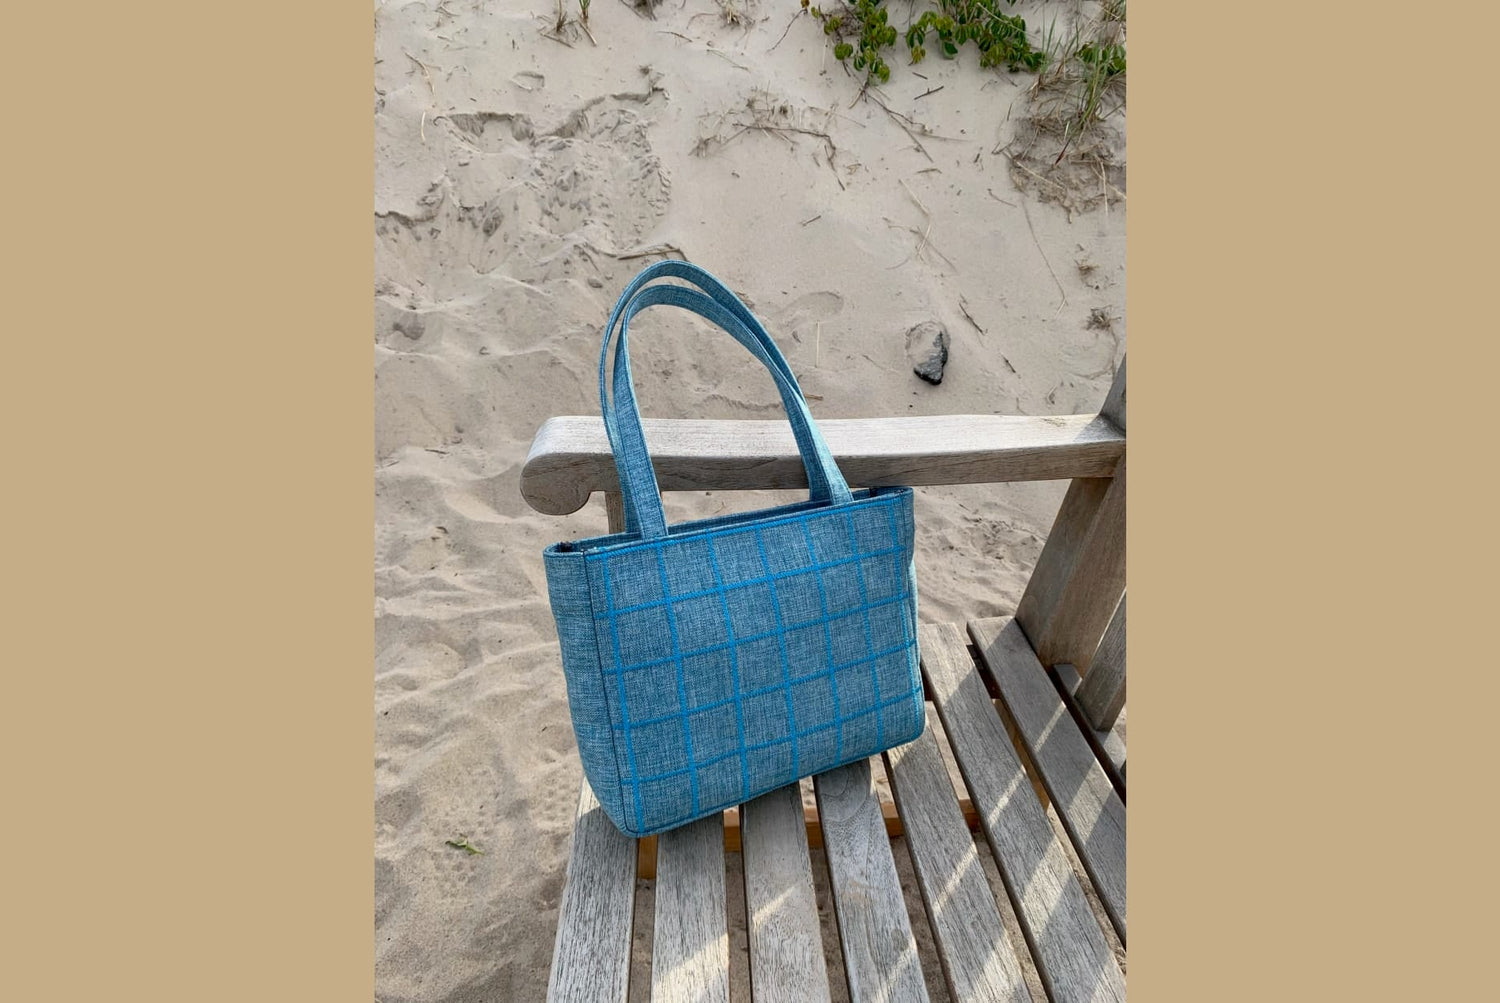 tote on a beach - bench